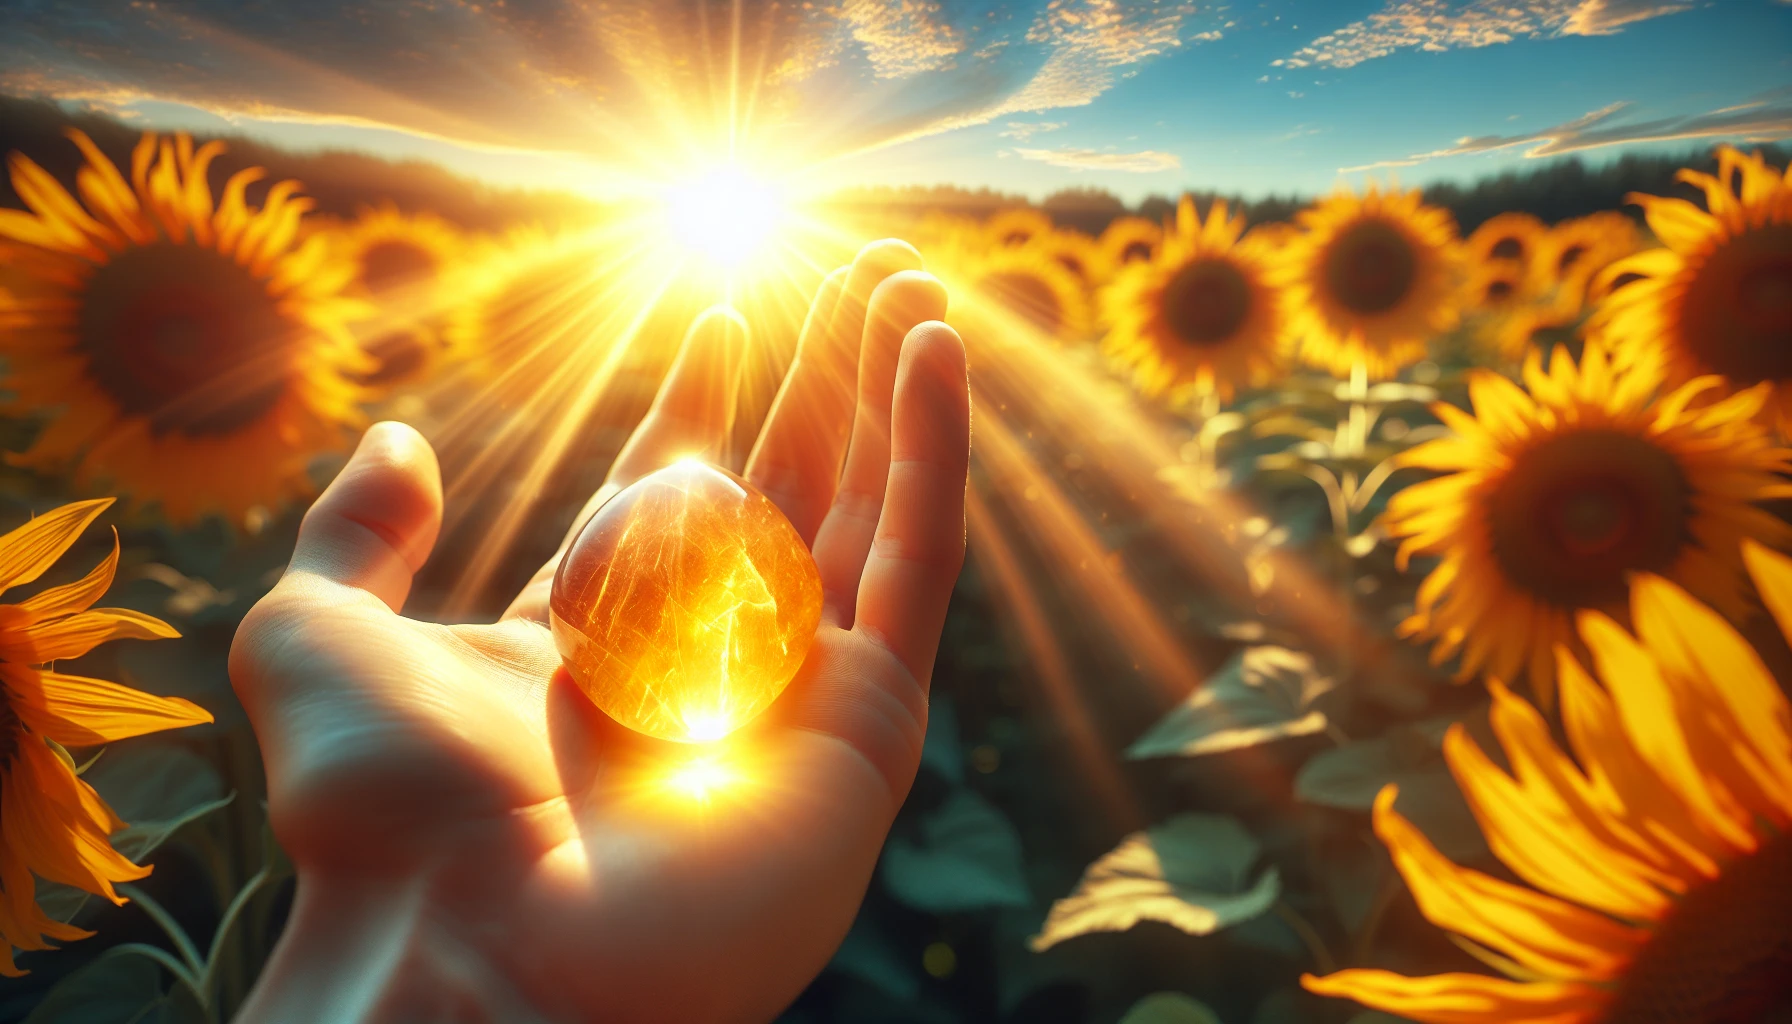 Sunstone: Meaning, Properties, Benefits & Uses